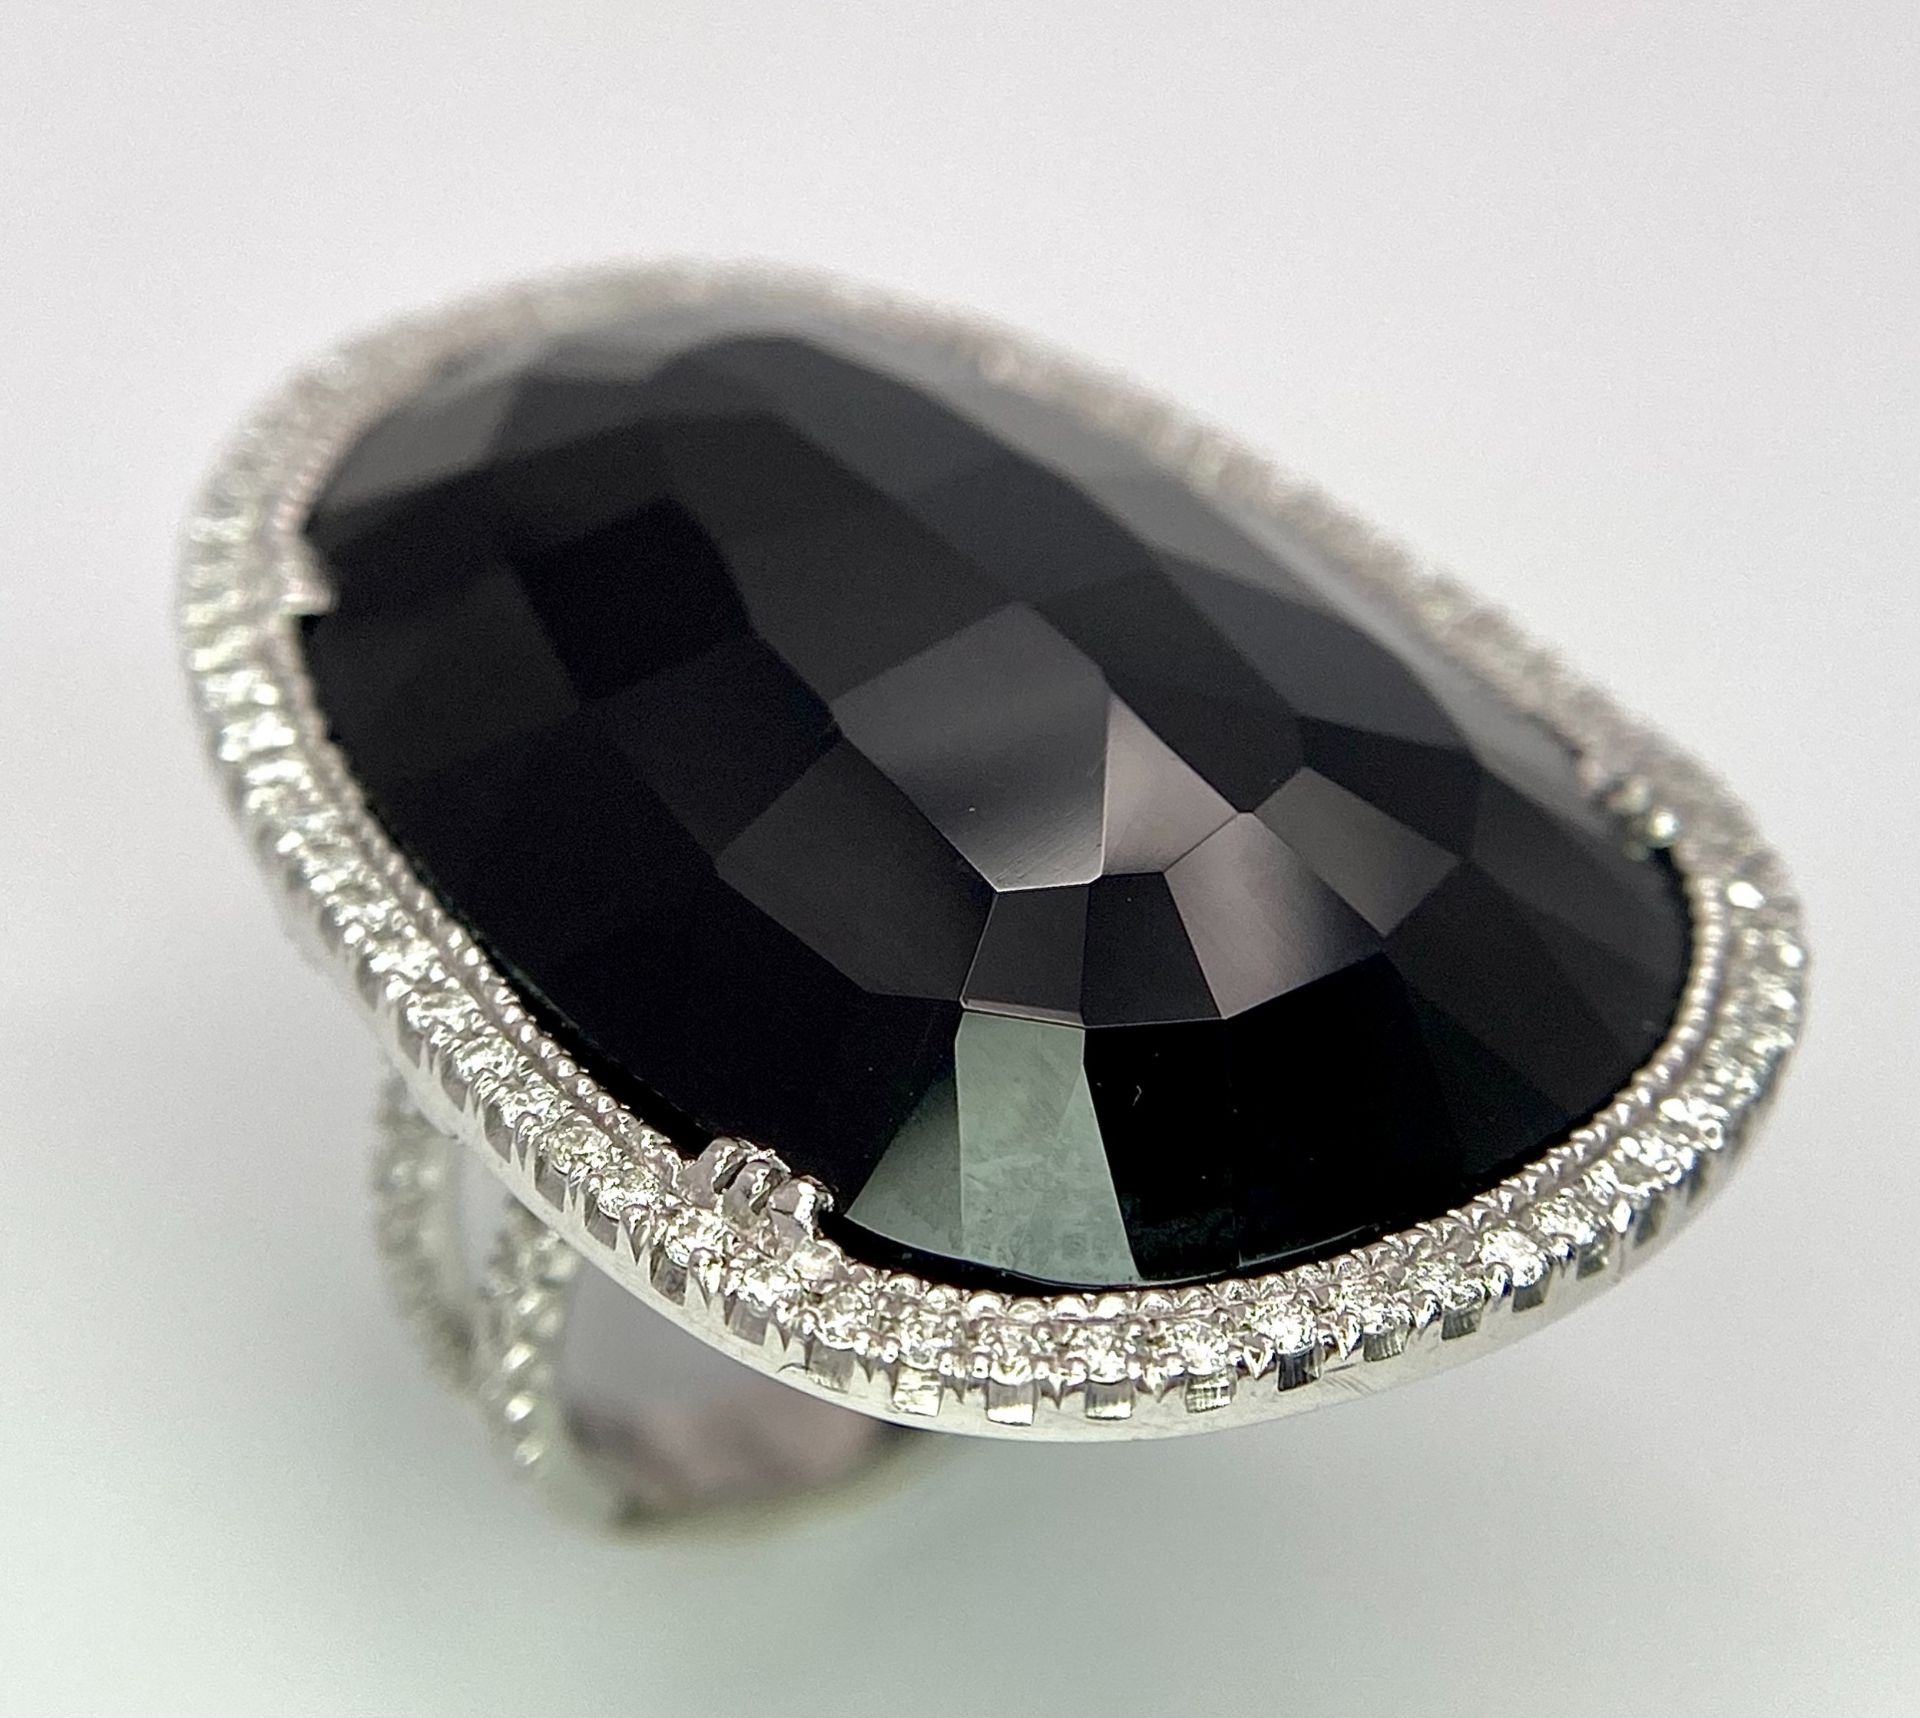 A Beautiful 18k White Gold Black Onyx and Diamond Ladies Dress Ring. Faceted black onyx with a